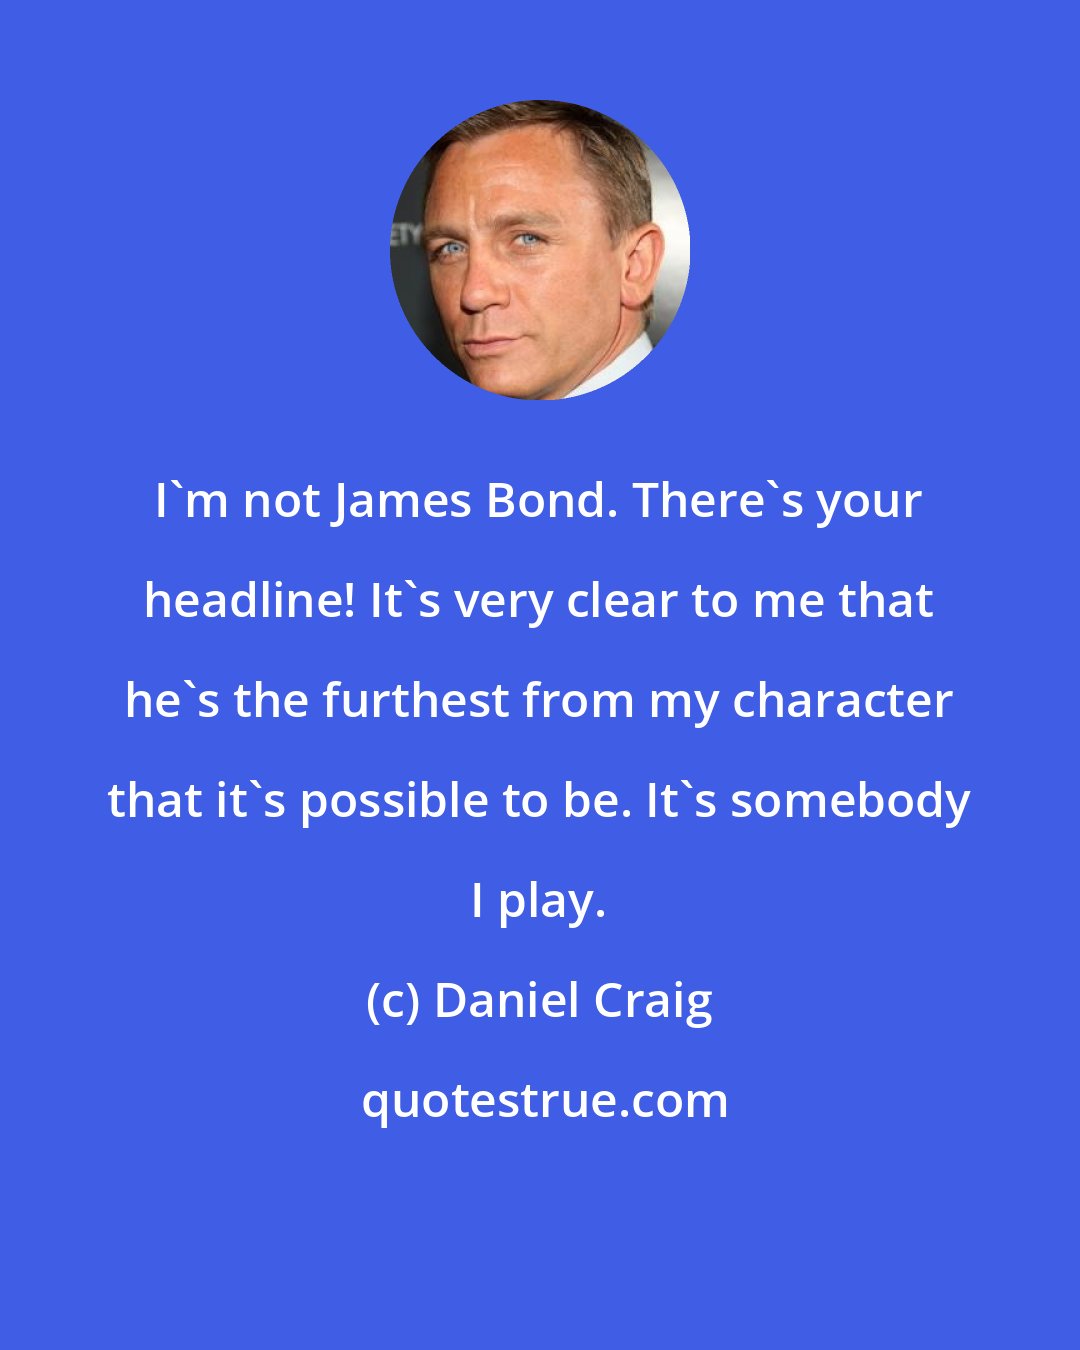 Daniel Craig: I'm not James Bond. There's your headline! It's very clear to me that he's the furthest from my character that it's possible to be. It's somebody I play.